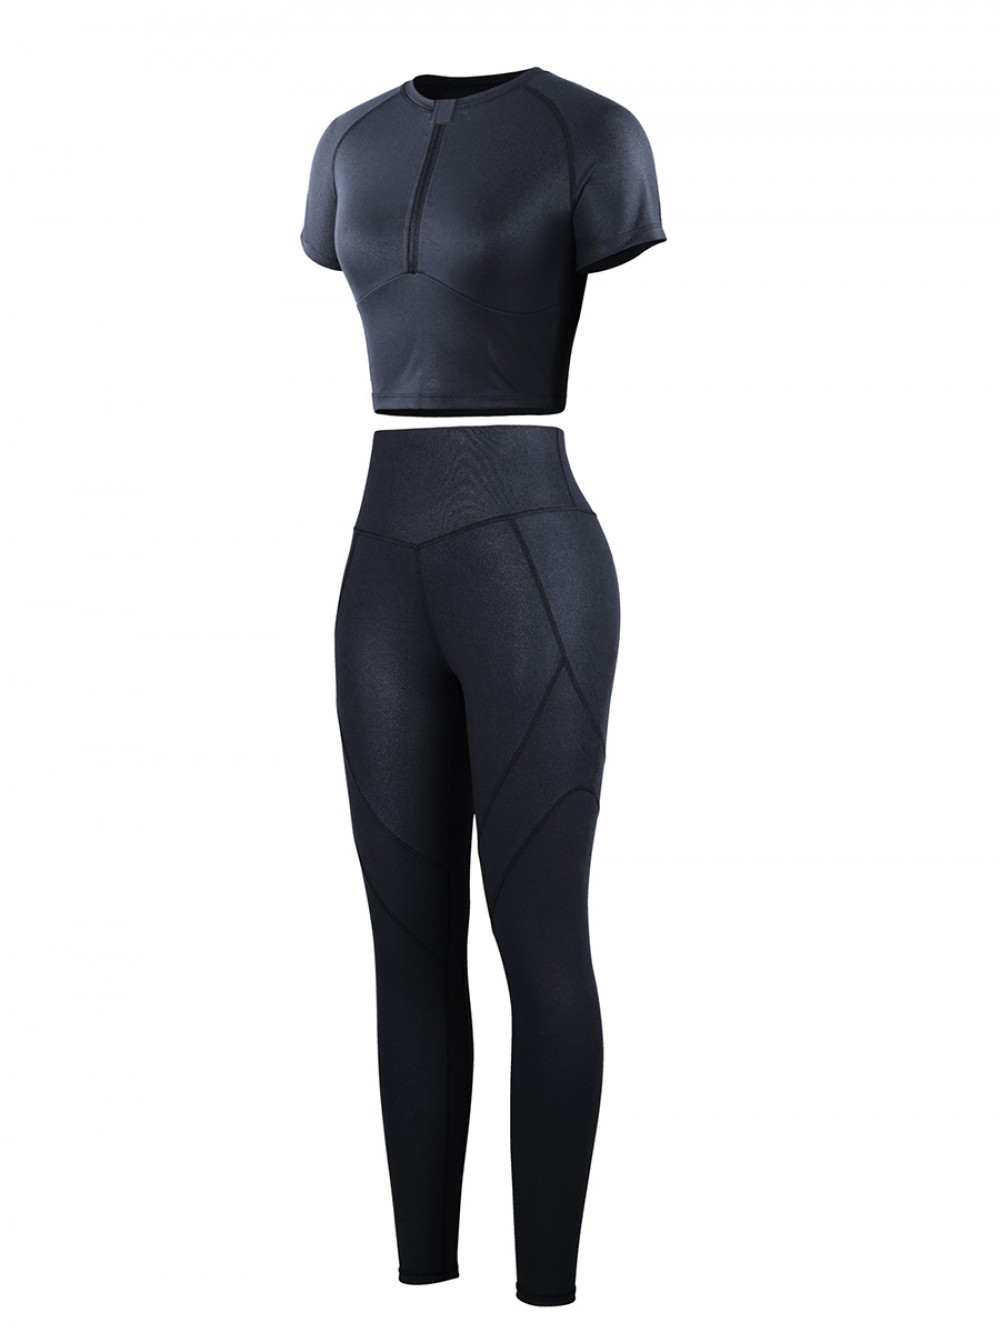 Black Short Sleeves High Waist Yoga Suits Outdoor Activity